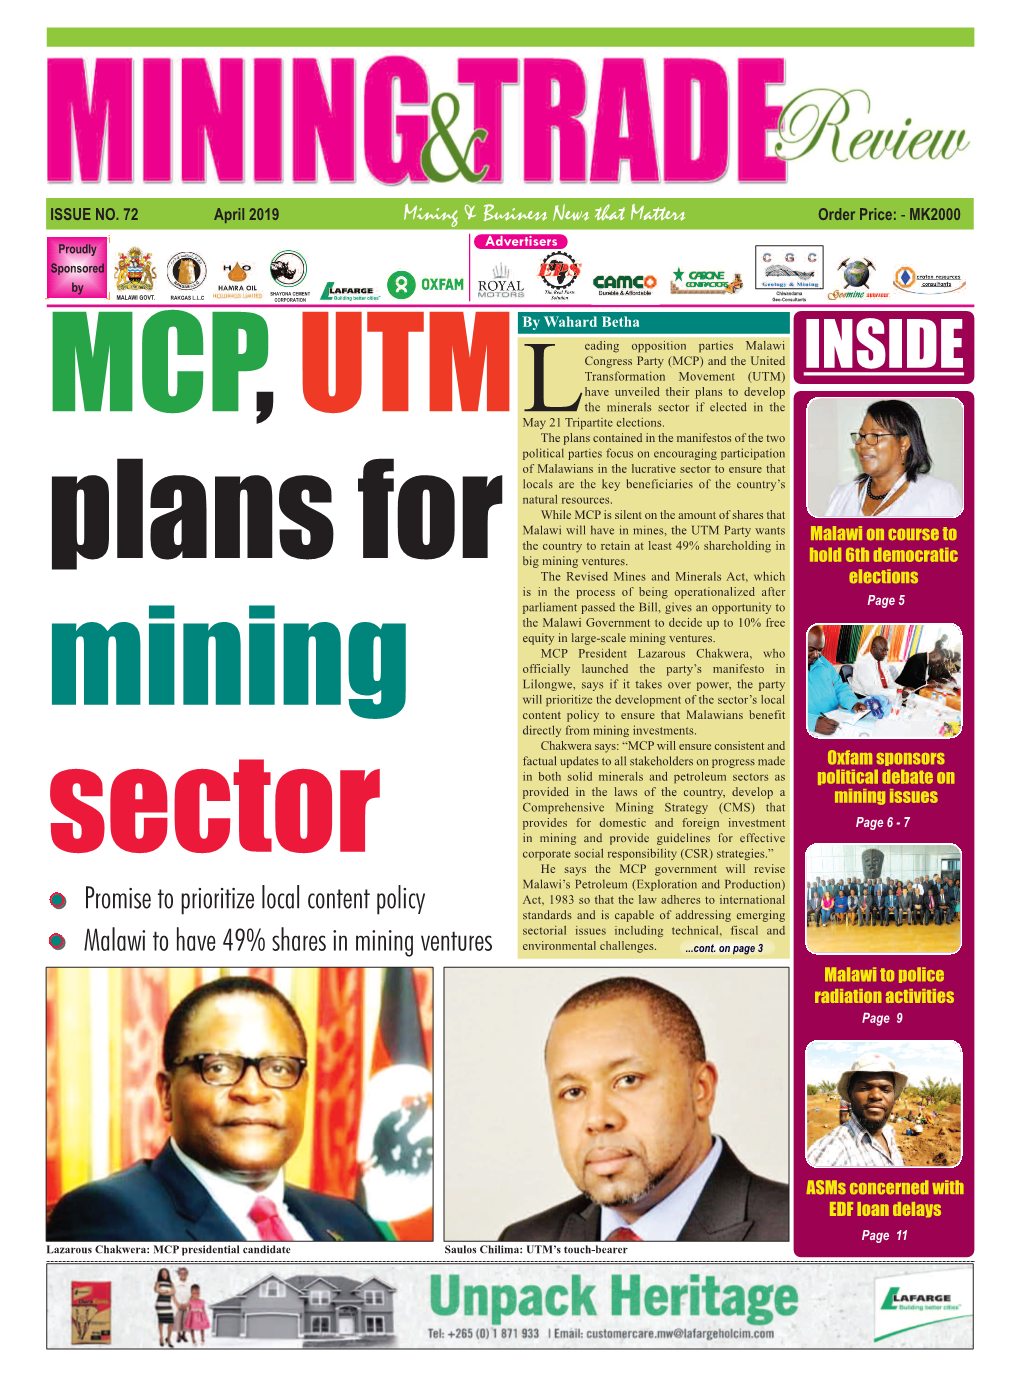 Politicians Must Make Realistic Promises on Mining Issues